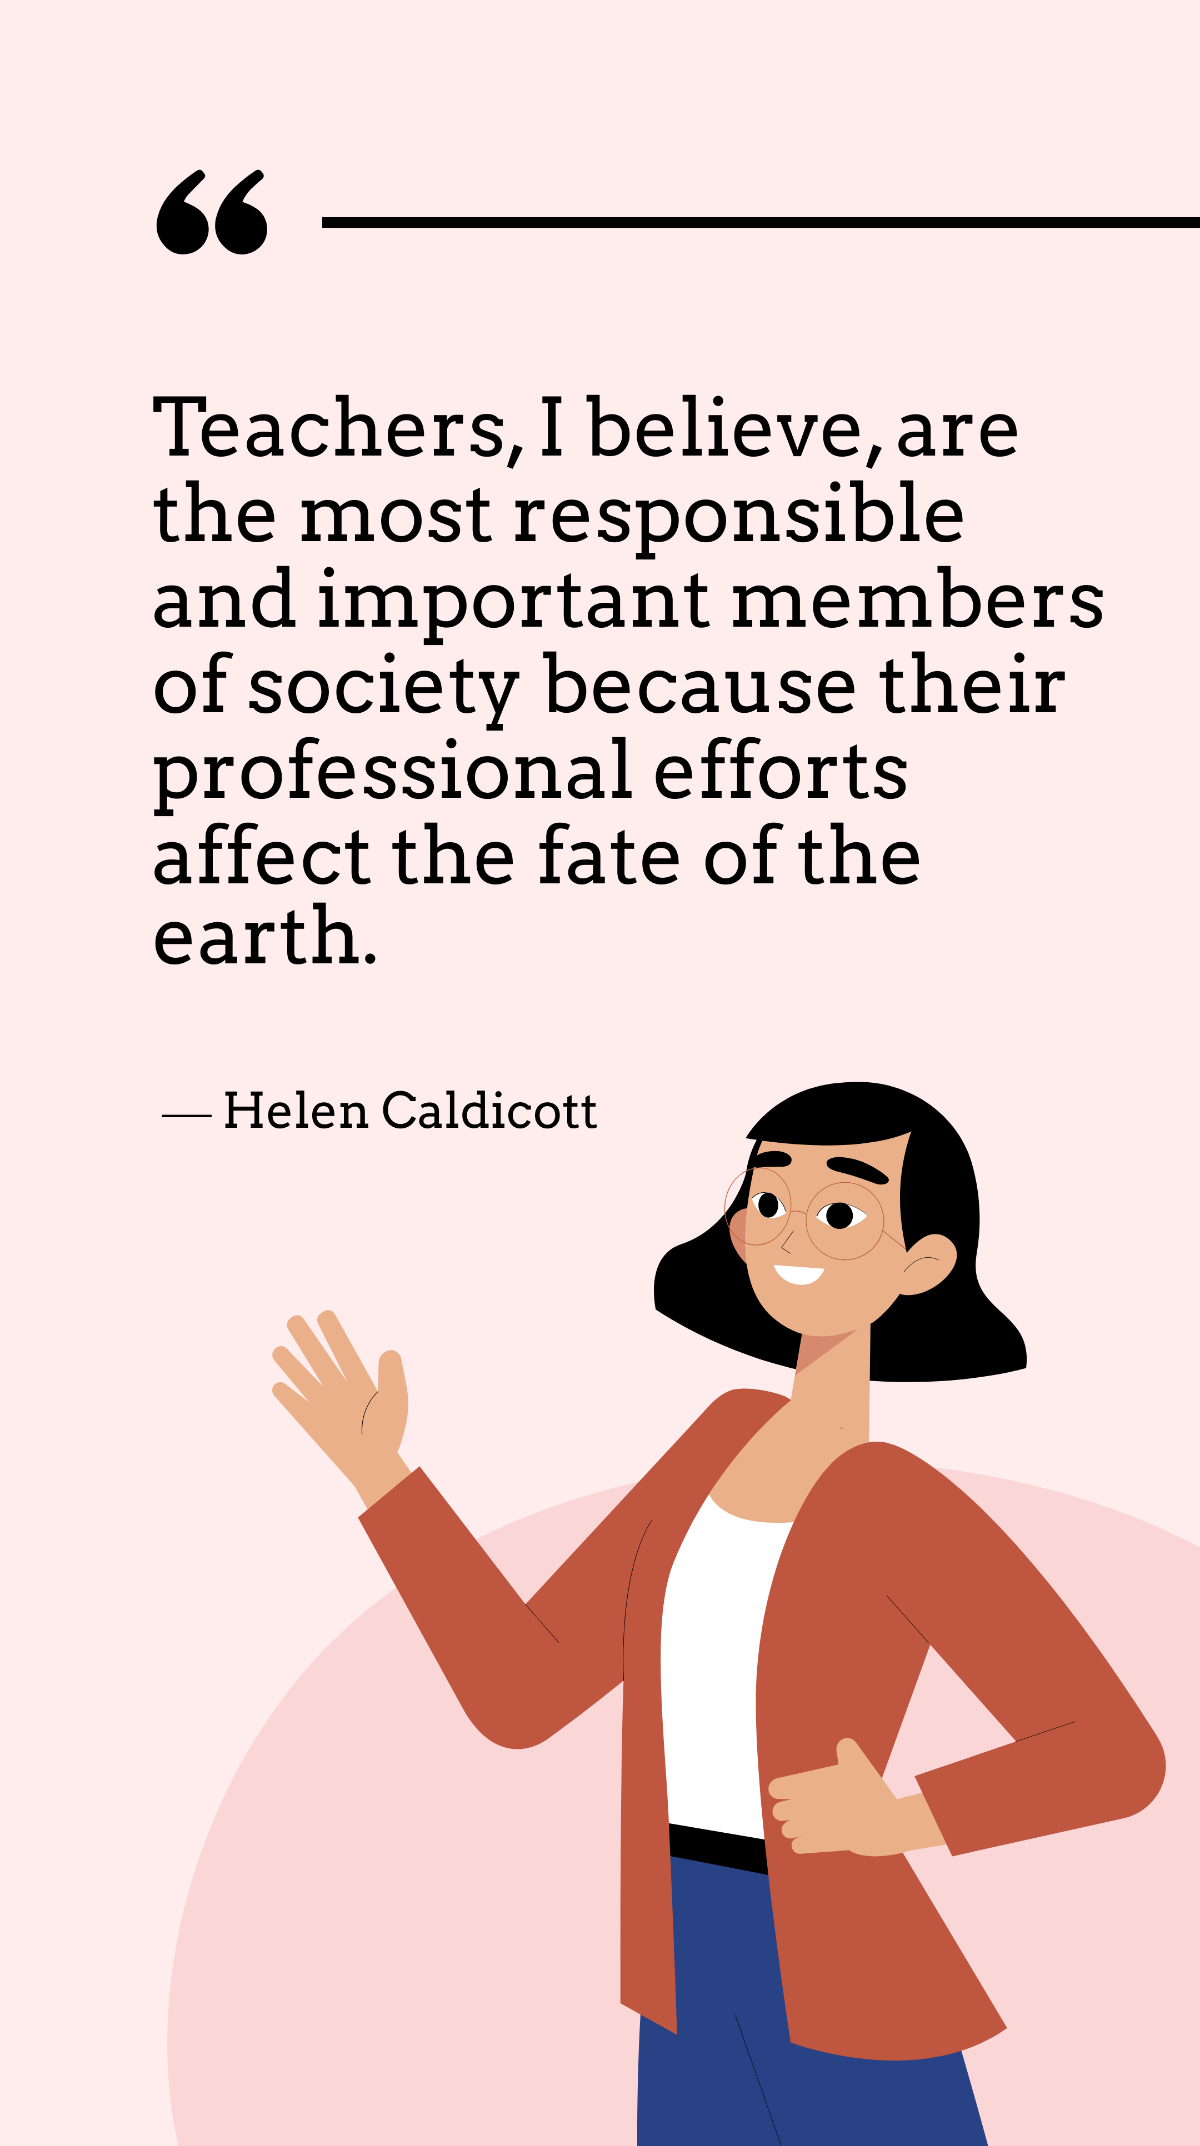 Helen Caldicott - Teachers, I believe, are the most responsible and important members of society because their professional efforts affect the fate of the earth. Template